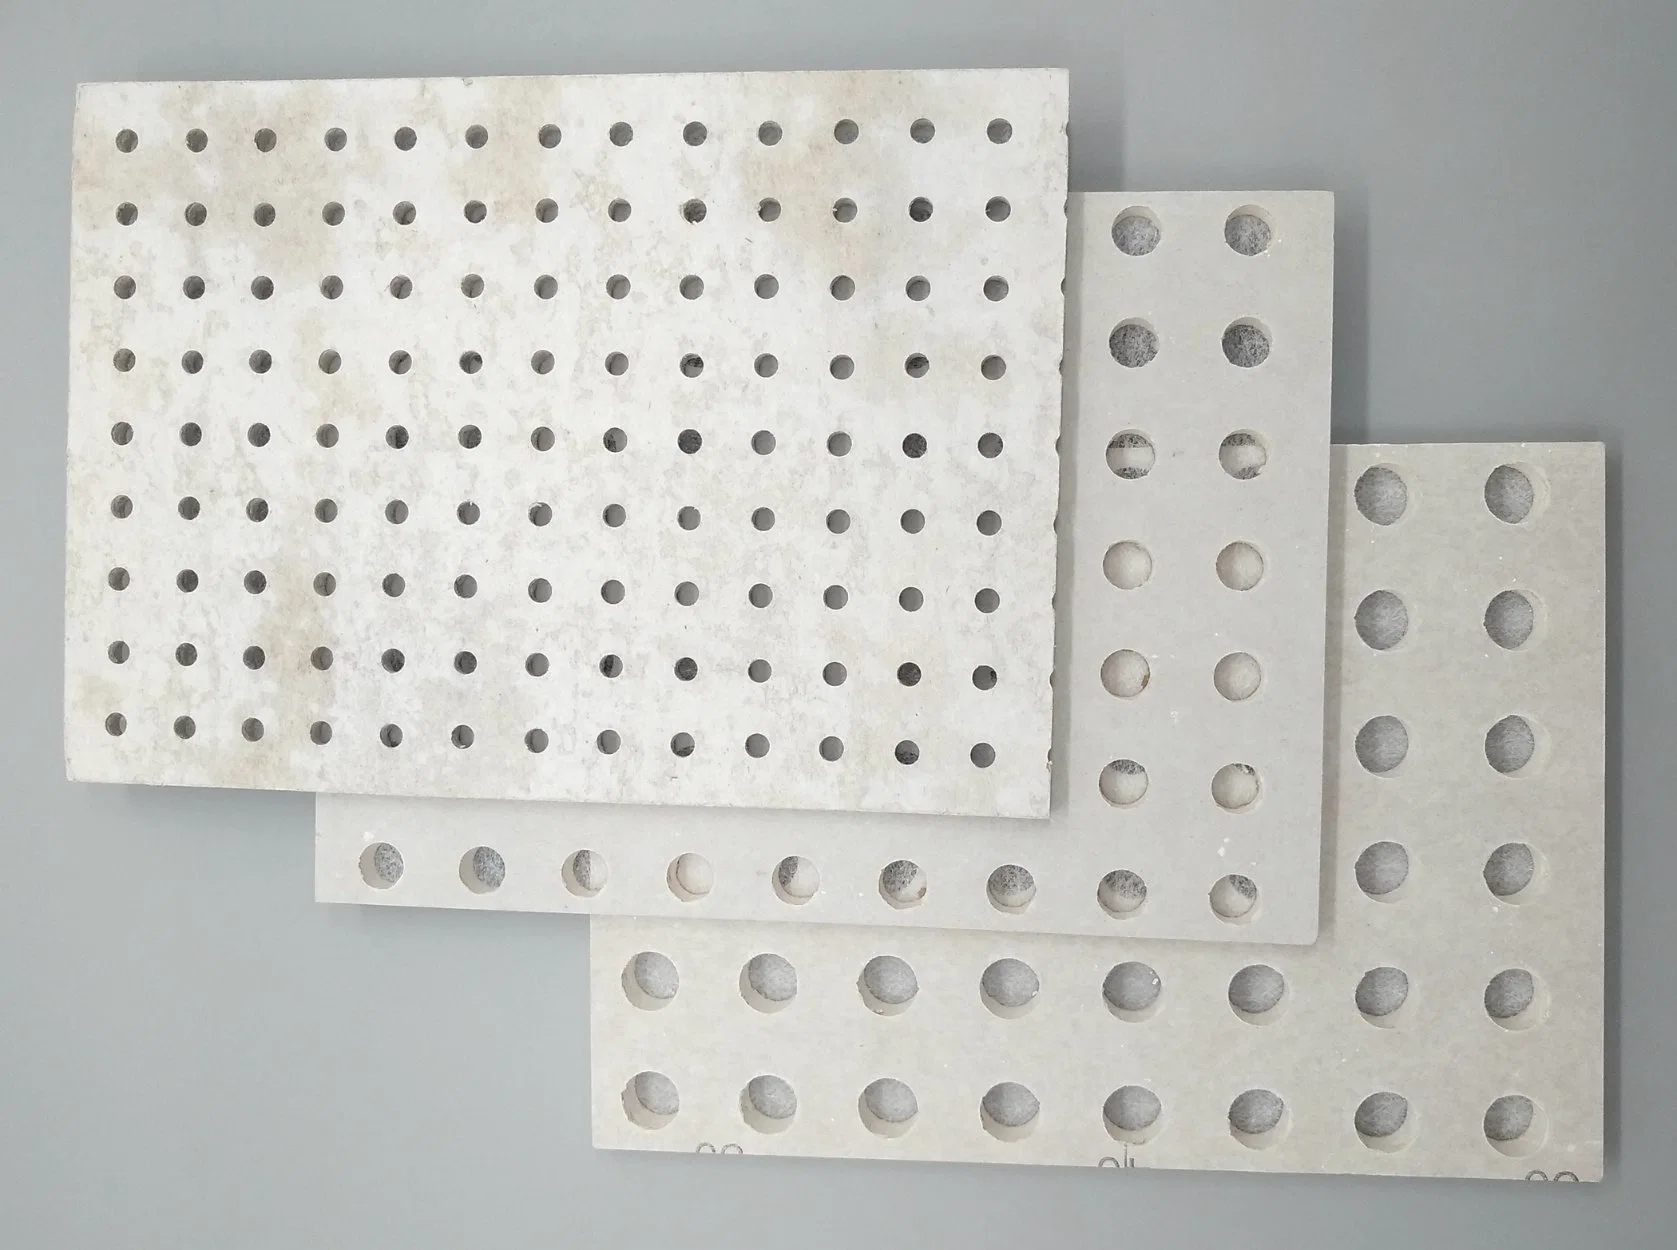 Gypsum Perforated Acoustic Board for Seamless Acoustical Ceiling and Wall System